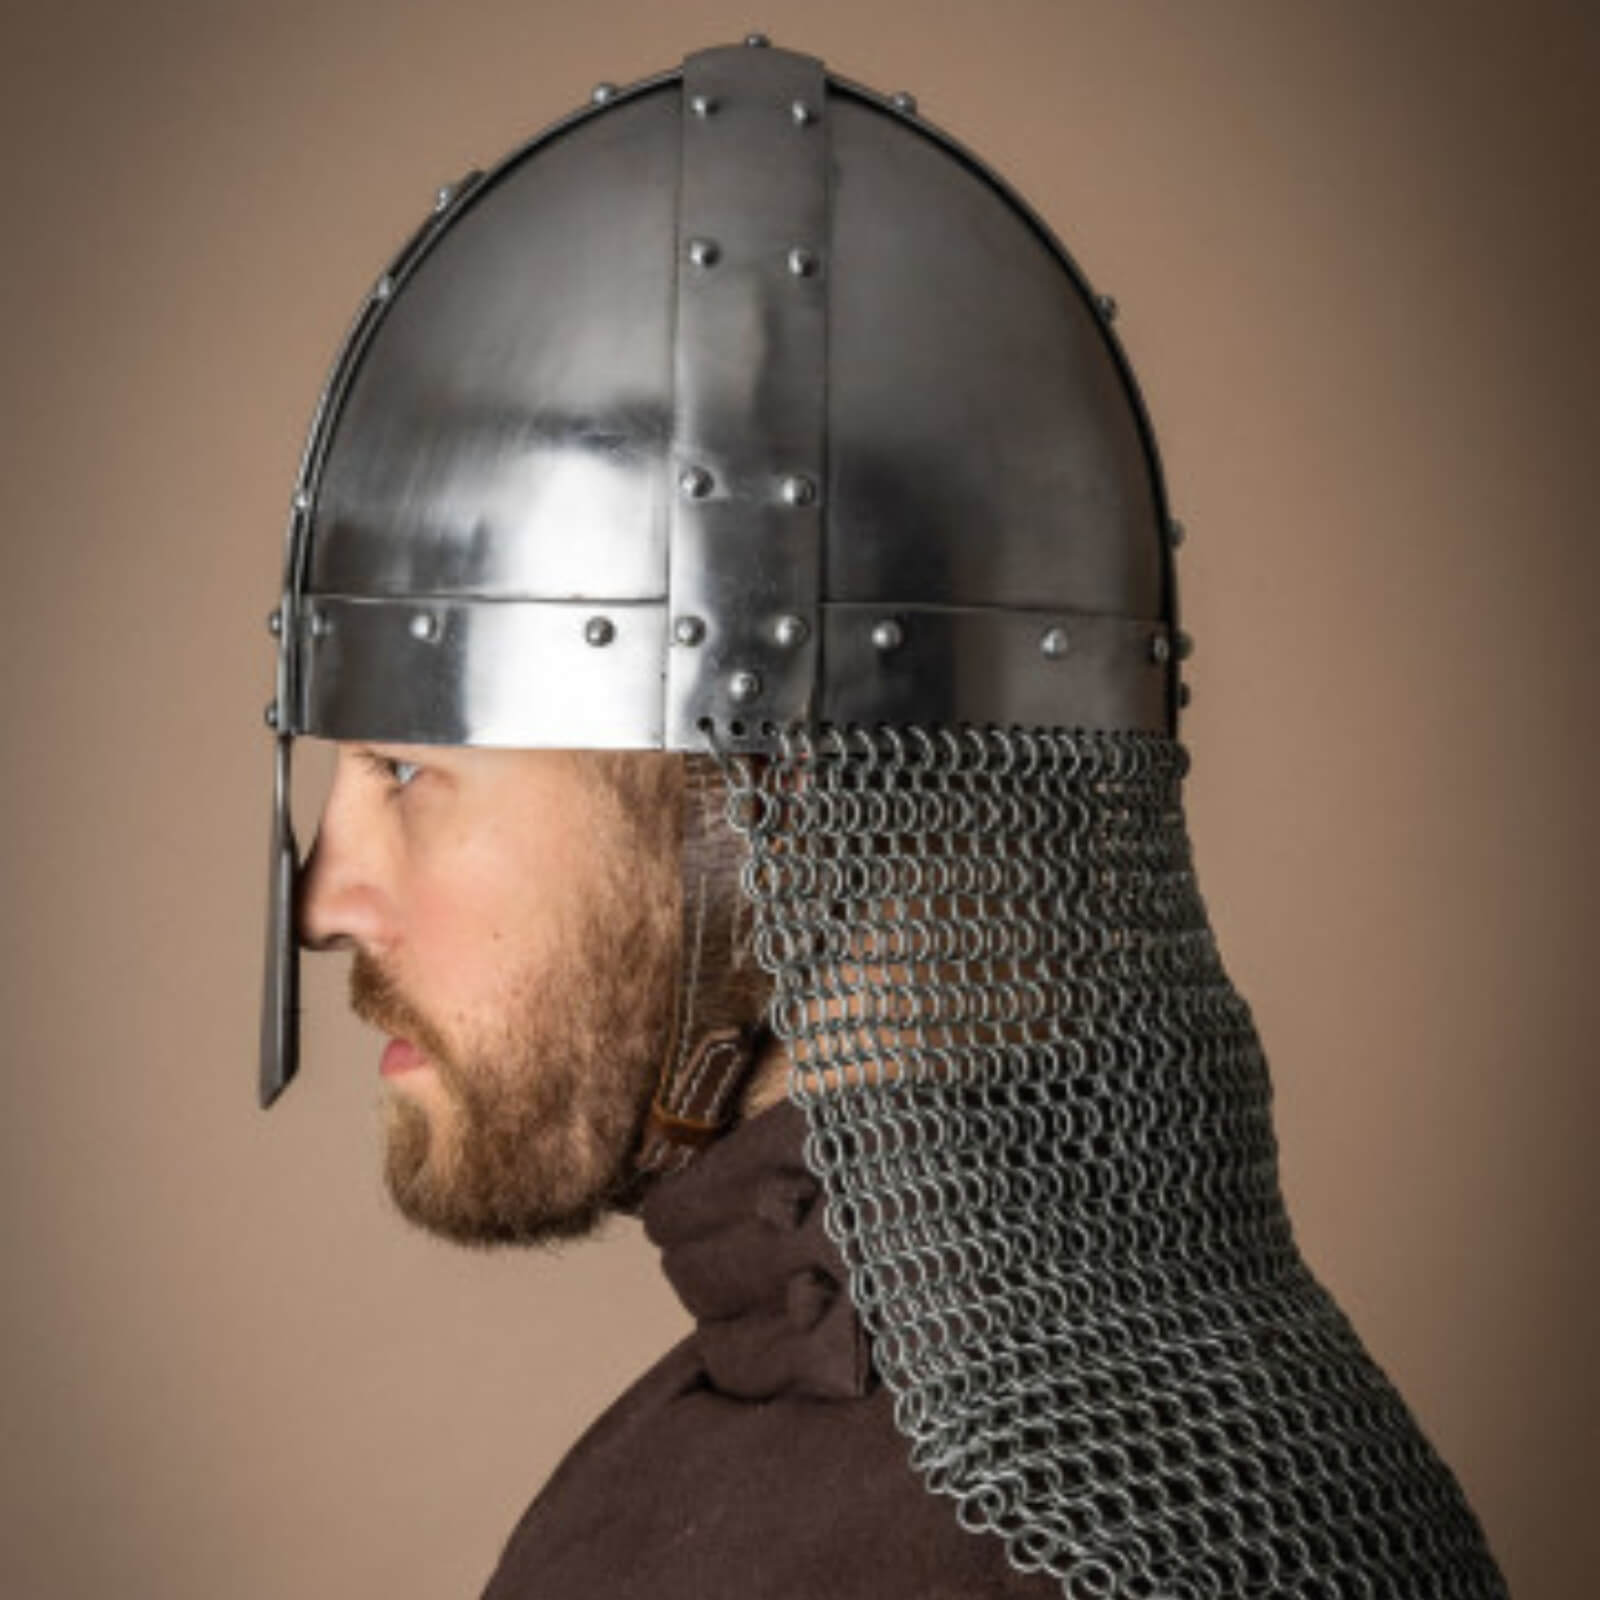 vkngjewelry armory Spangenhelm with aventail